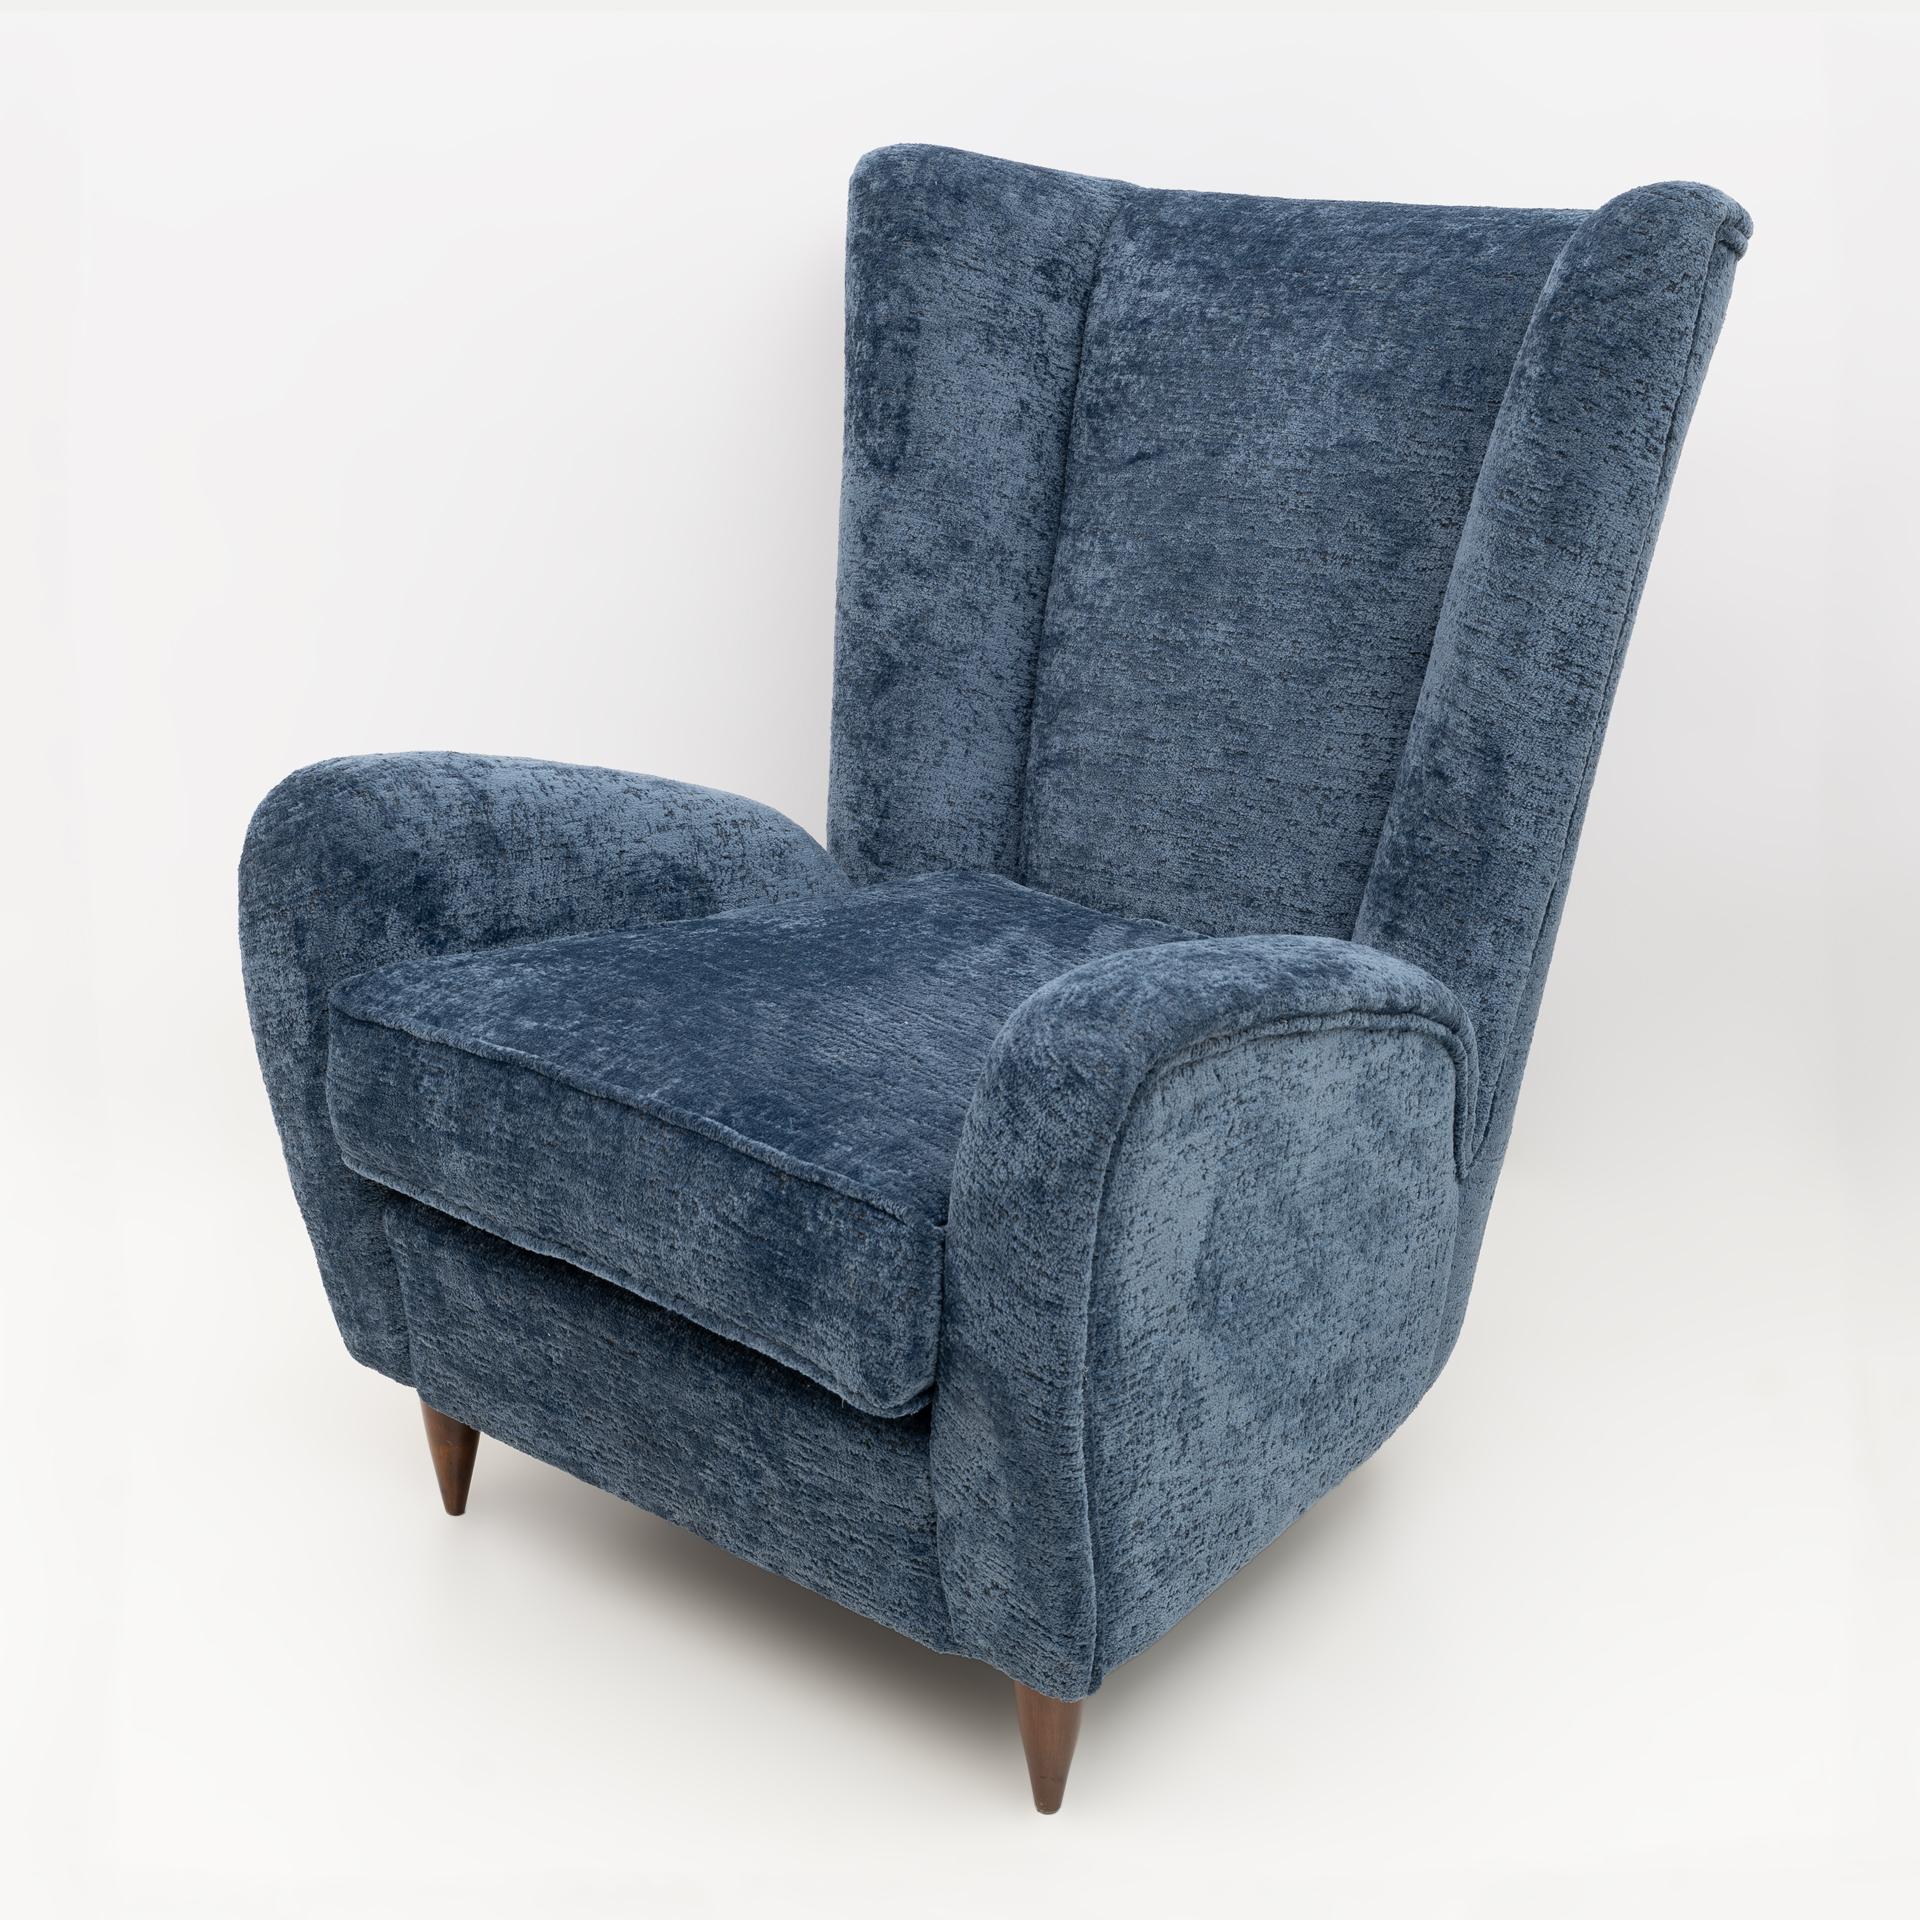 Beautiful armchair with curved armrests, made by Paolo Buffa in 1950. The curved and padded wooden structure, the covering has been replaced with a beautiful dark blue Bouclè fabric, as shown in the photo. Ready to furnish your home